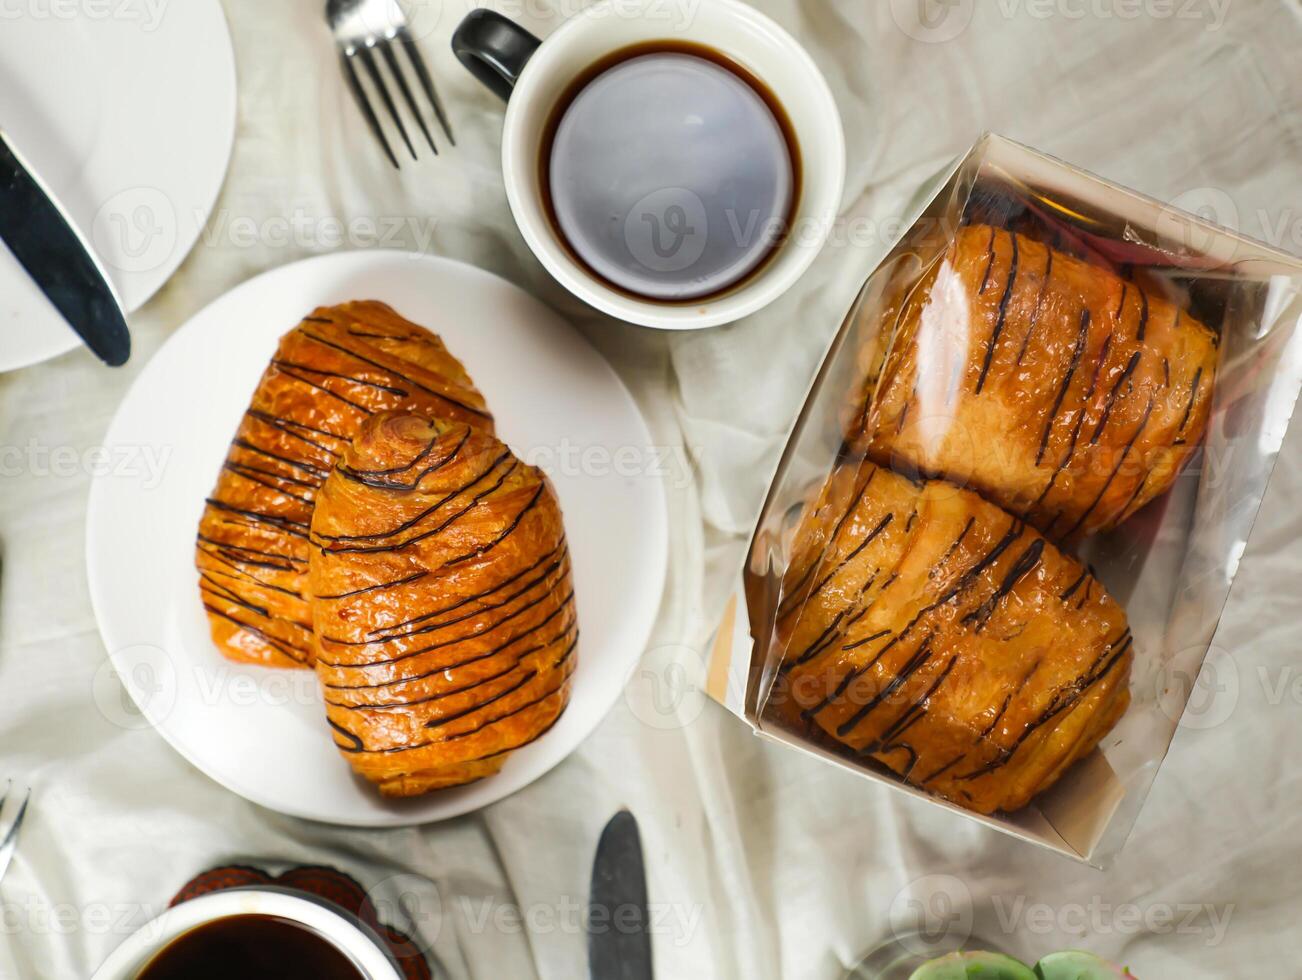 Chocolate Croissant served on plate with cup of black coffee with knife and fork isolated on napkin top view of french breakfast baked food item on grey background photo